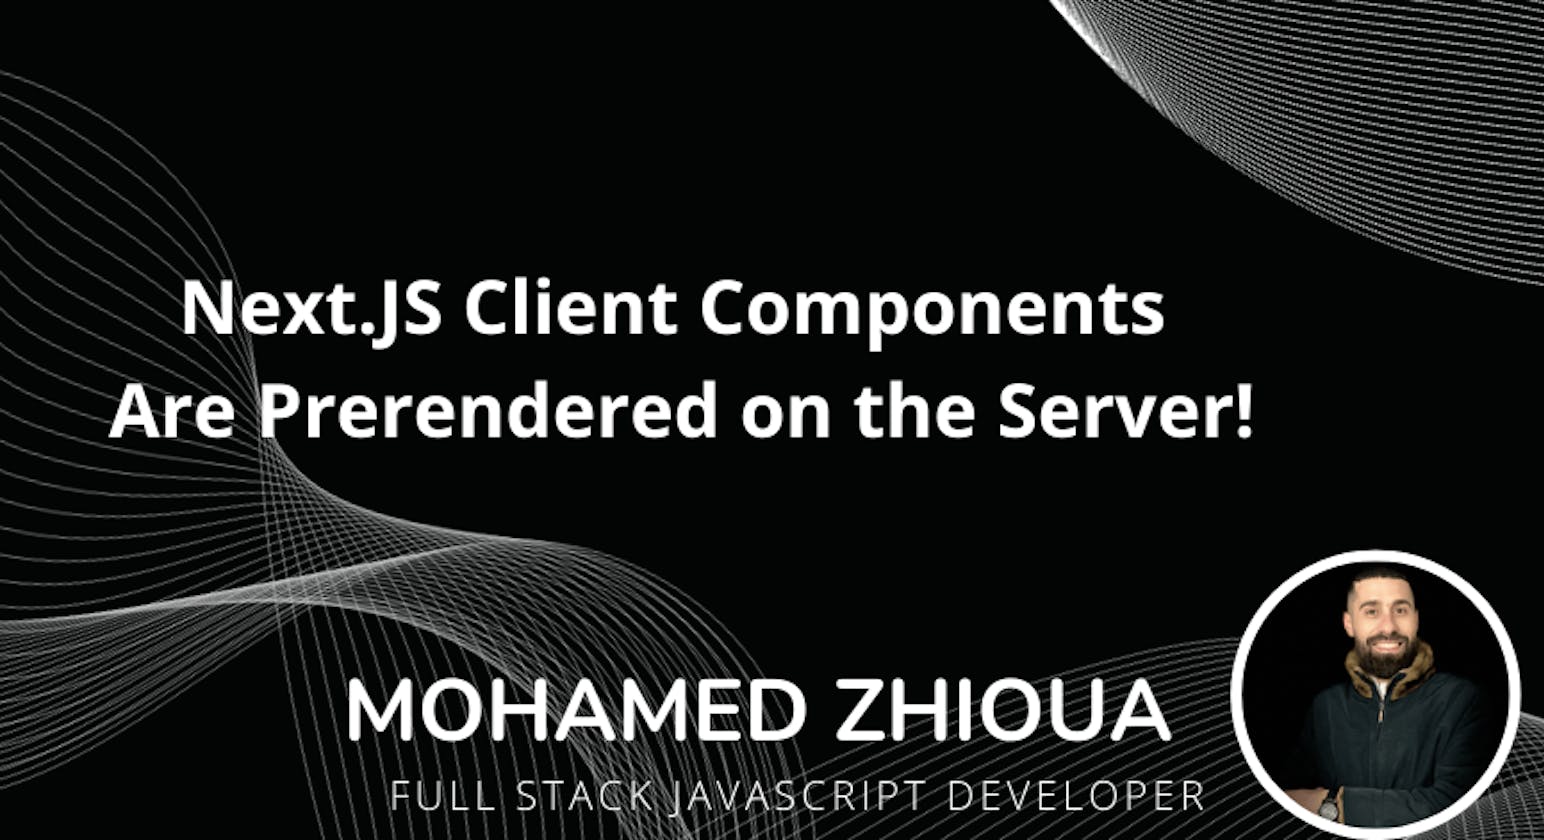 Next.JS Client Components Are Prerendered on the Server!